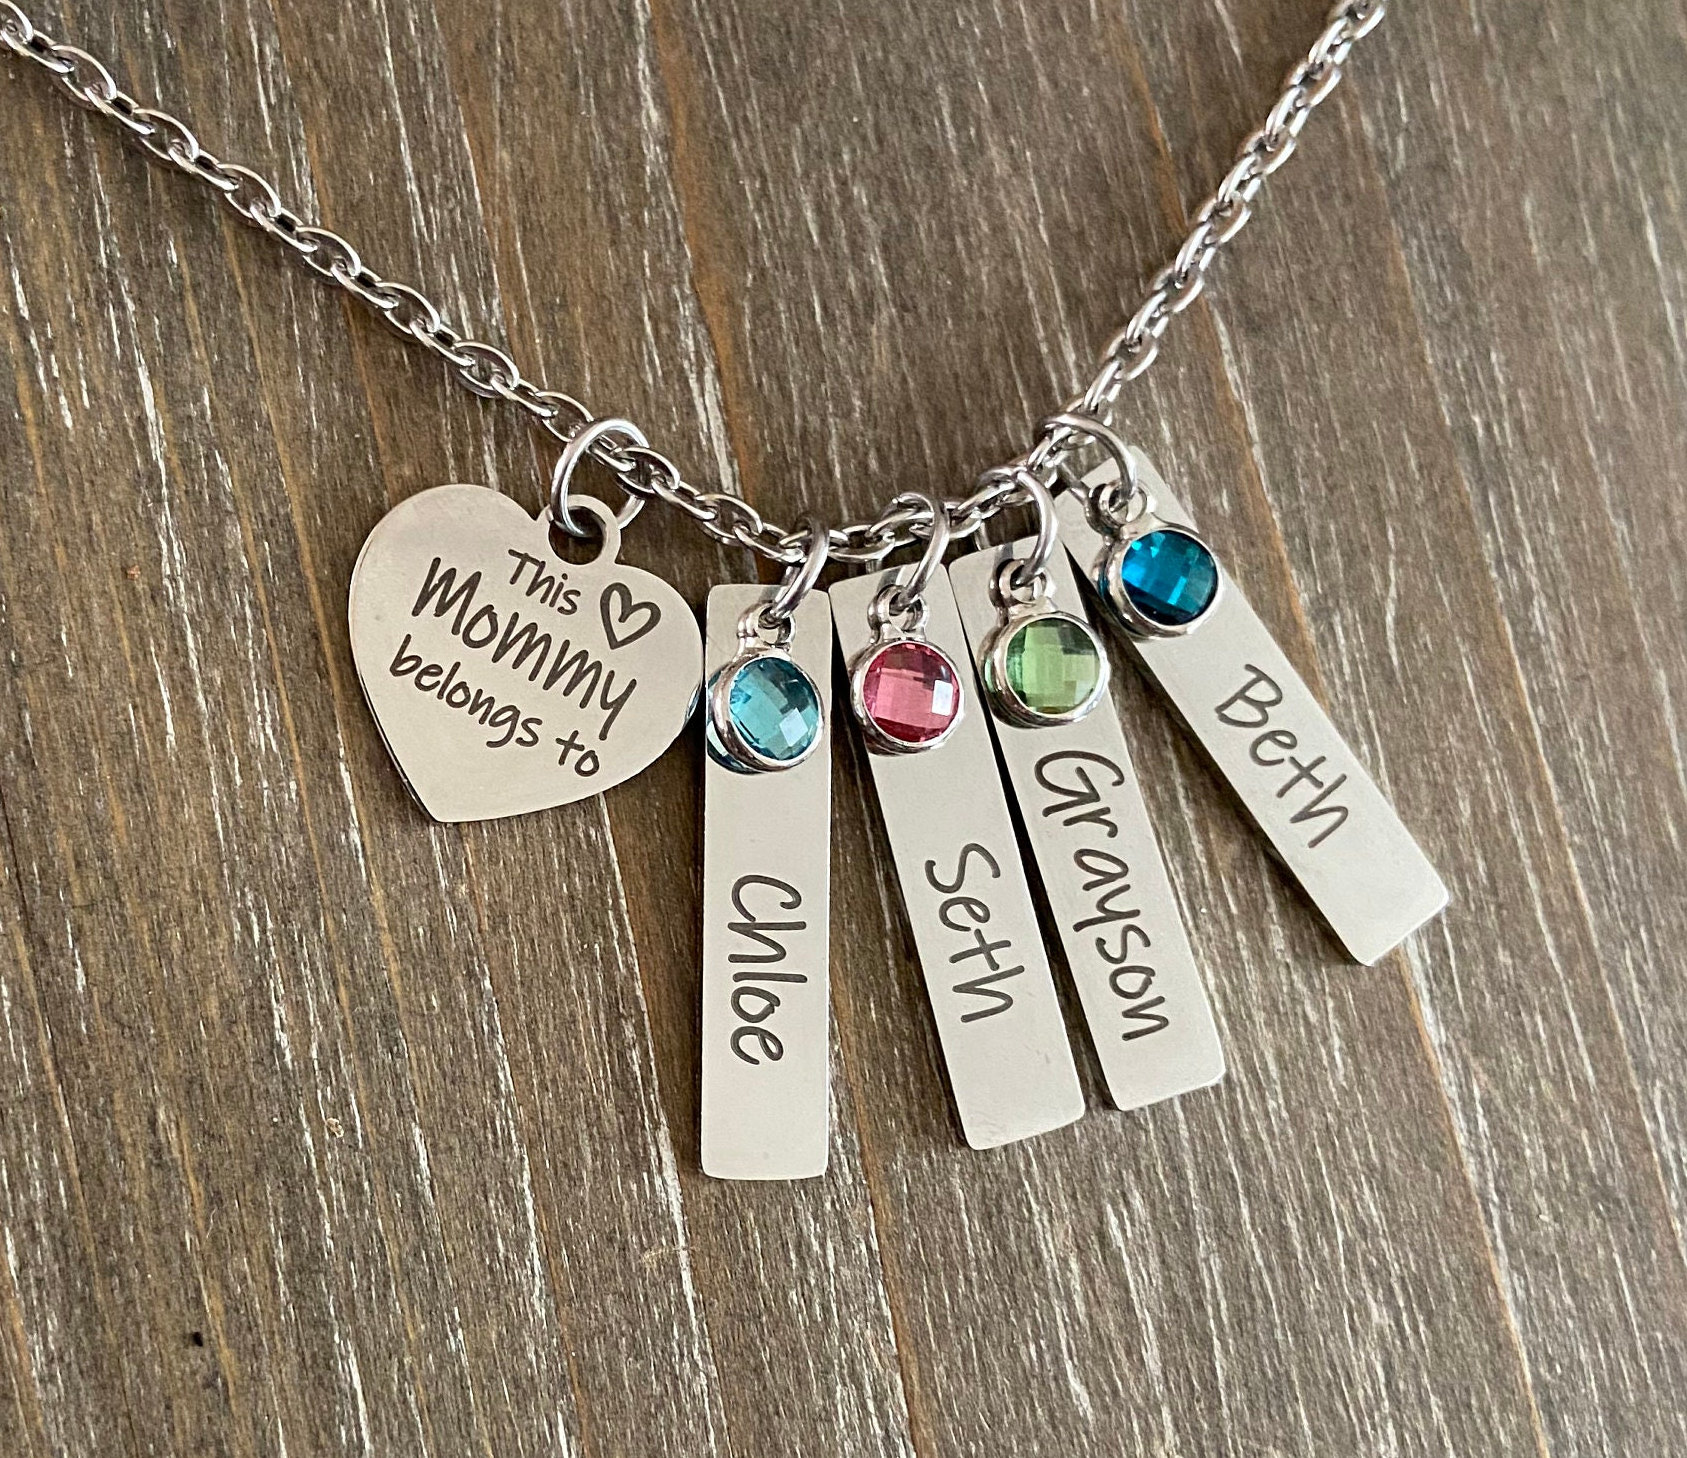 Personalized STERLING SILVER Gift for Mom Silver Kids Name Birthstone  Necklace | eBay